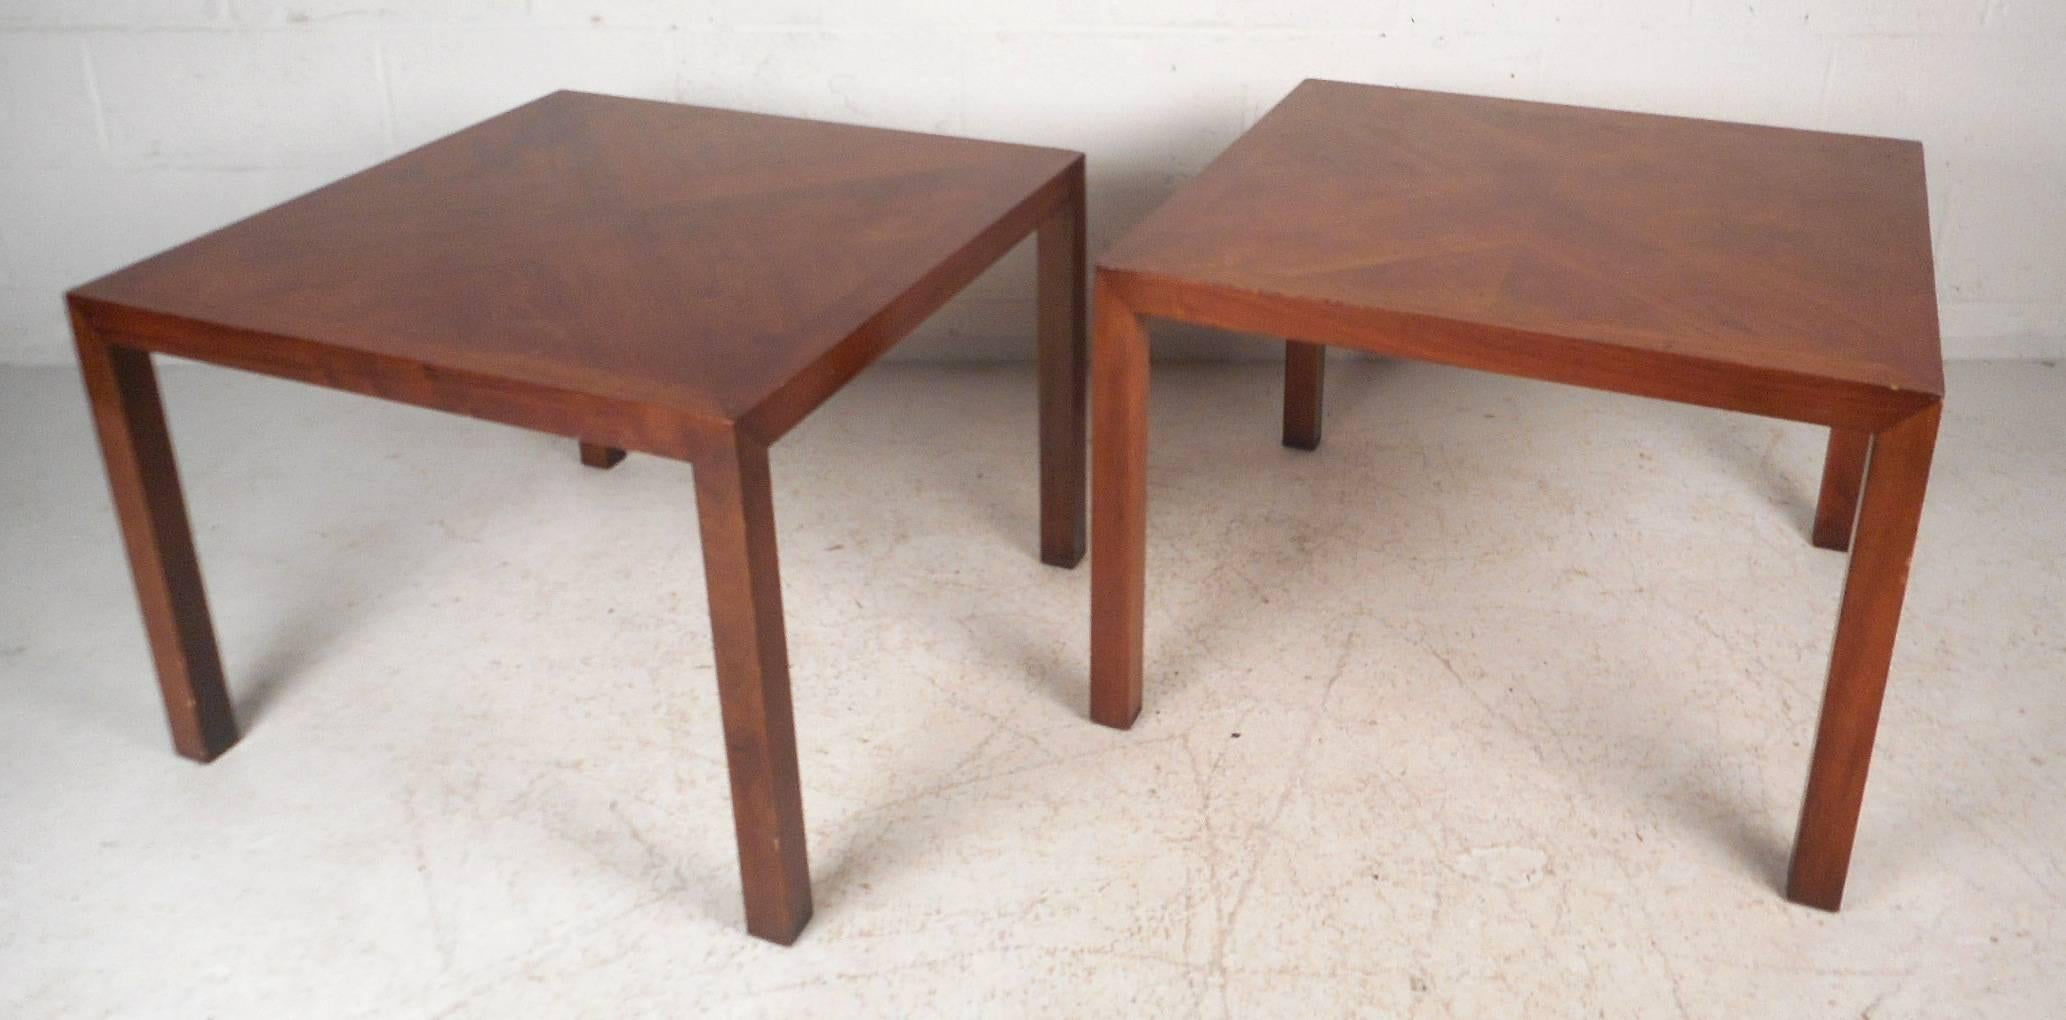 Beautiful pair of vintage modern end tables features a unique walnut wood grain on top running in different directions. Sleek and sturdy design shows true quality craftsmanship by Lane Furniture Company. The stylish wide square top provides plenty